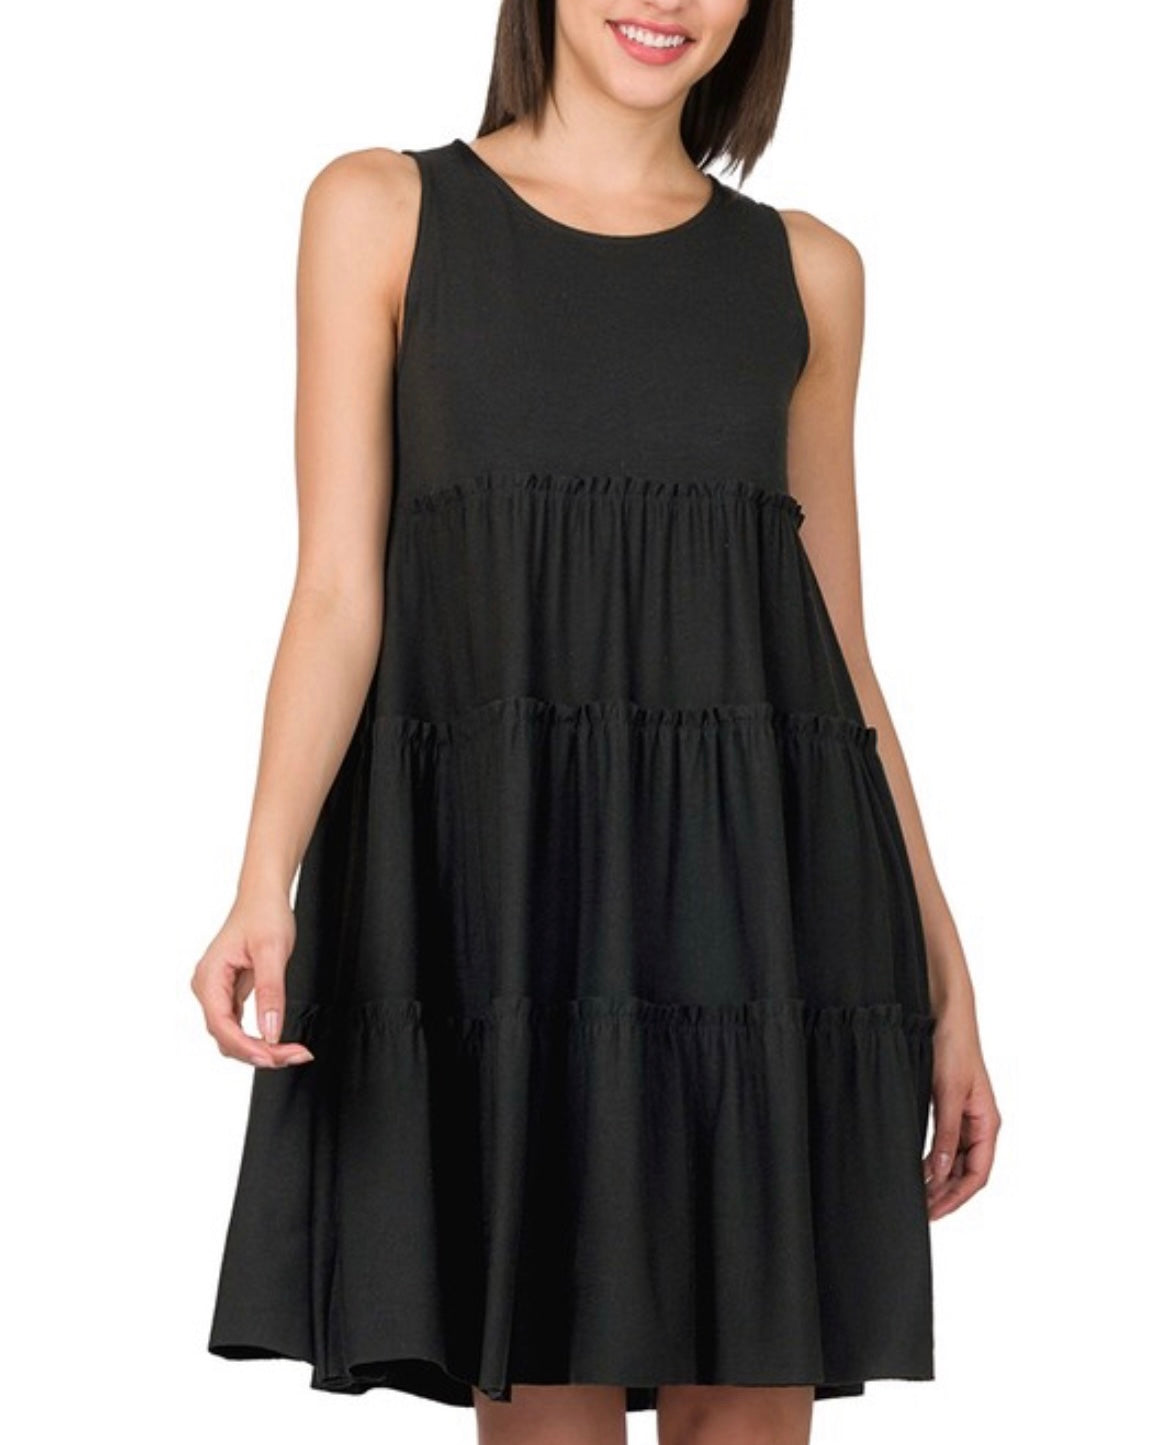 Sleeveless Tiered Dress (2 colors)